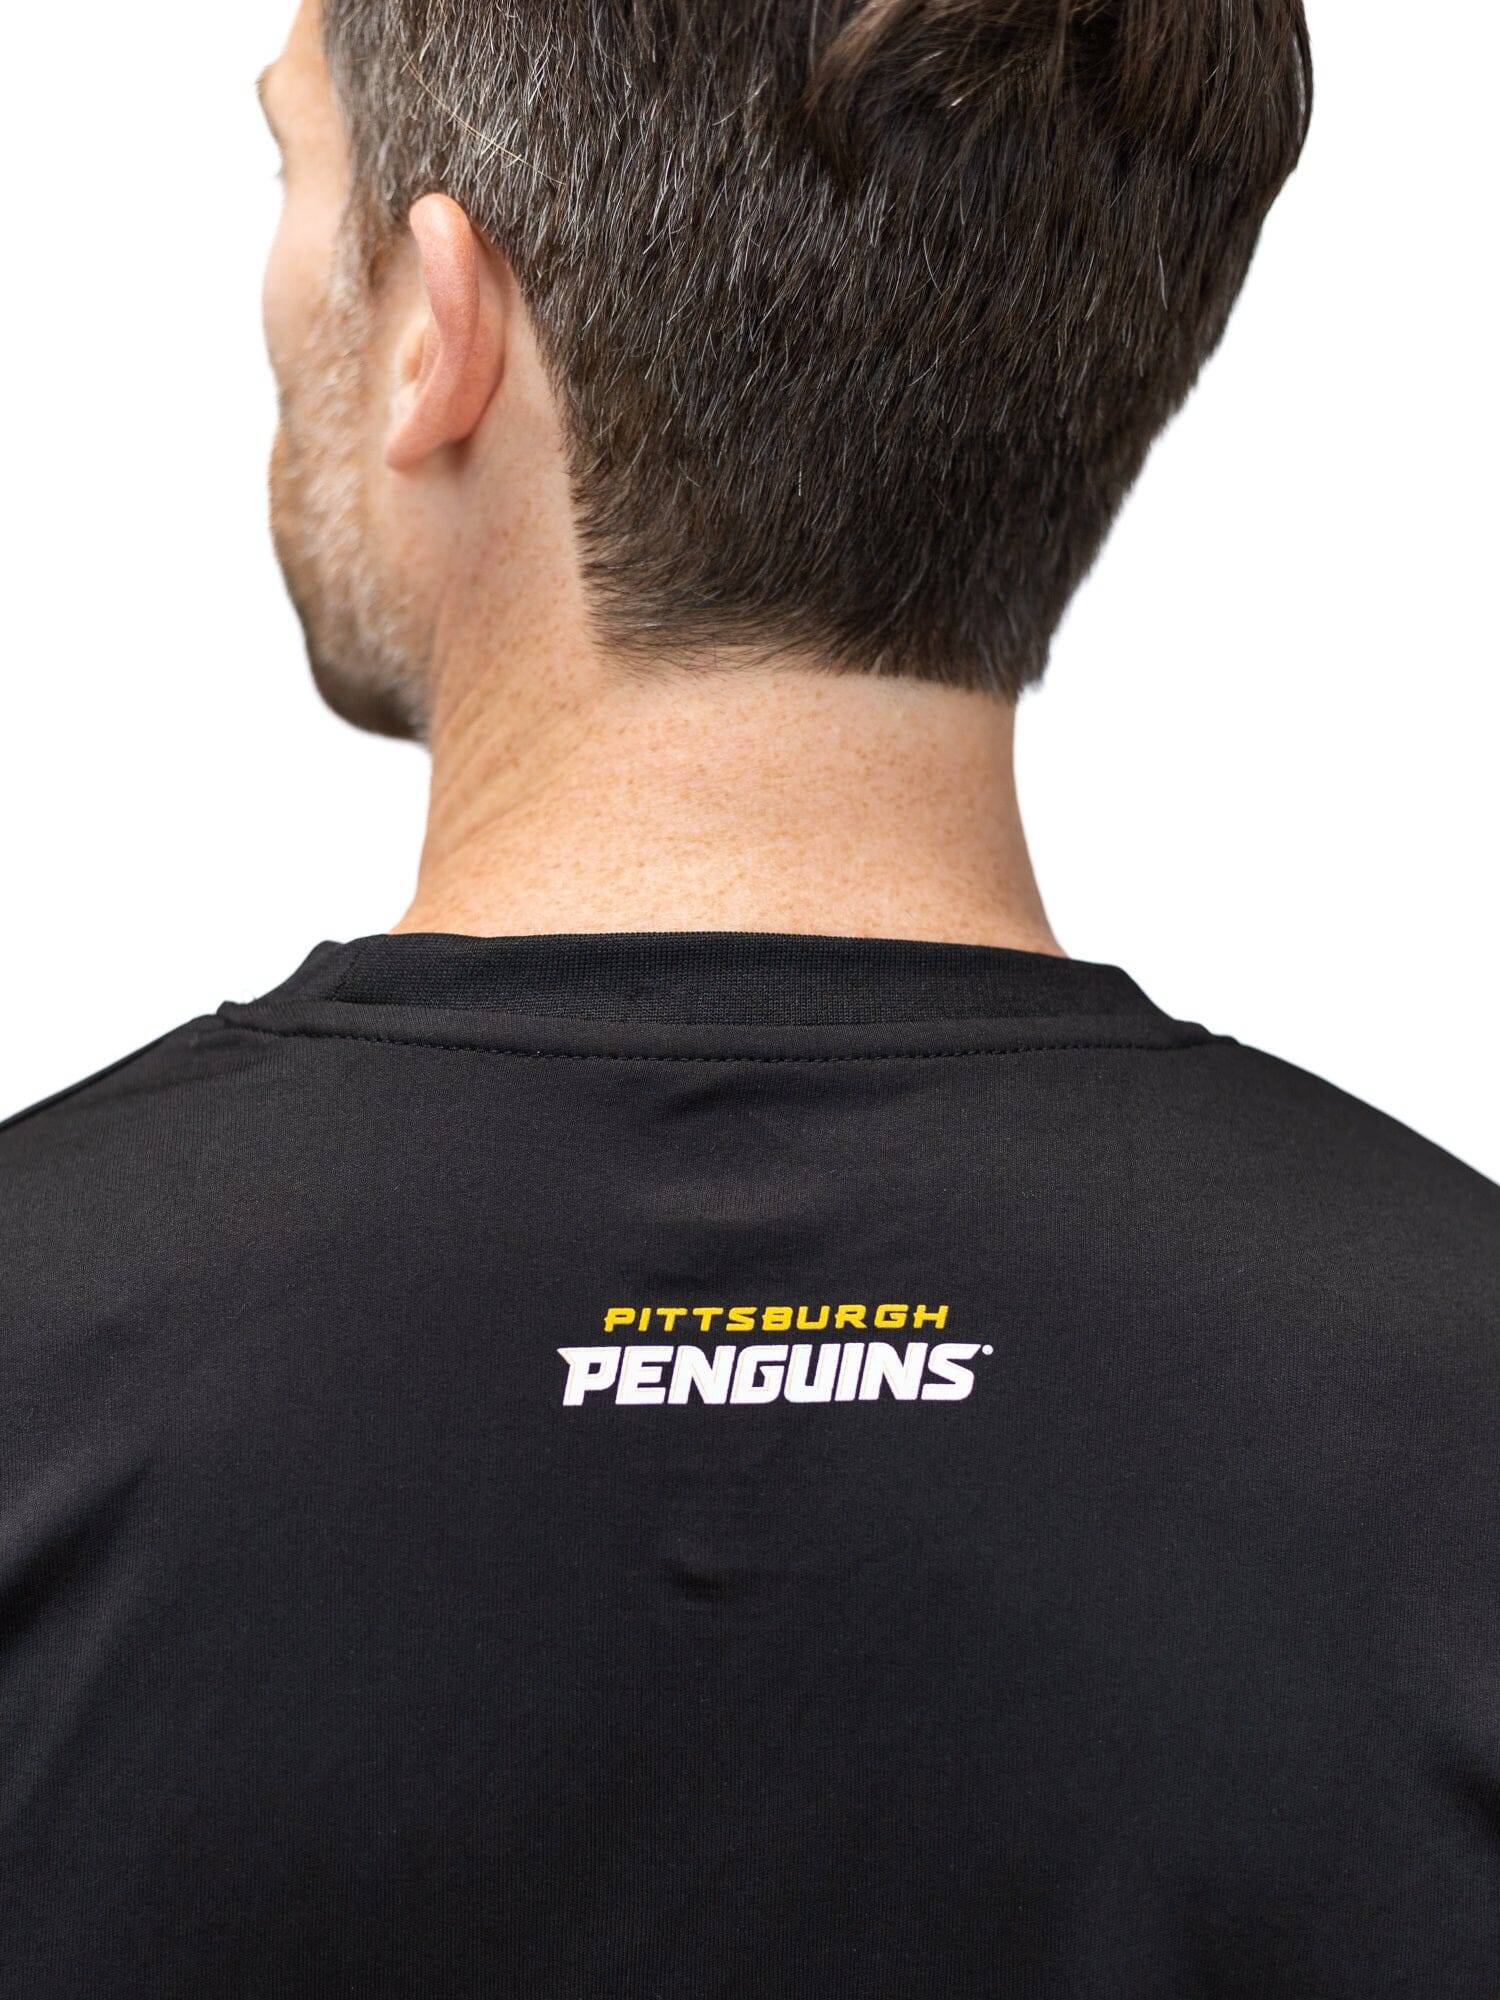 Bench Clearers Pittsburgh Penguins Full Fandom Moisture Wicking T-Shirt - S / Black / Polyester